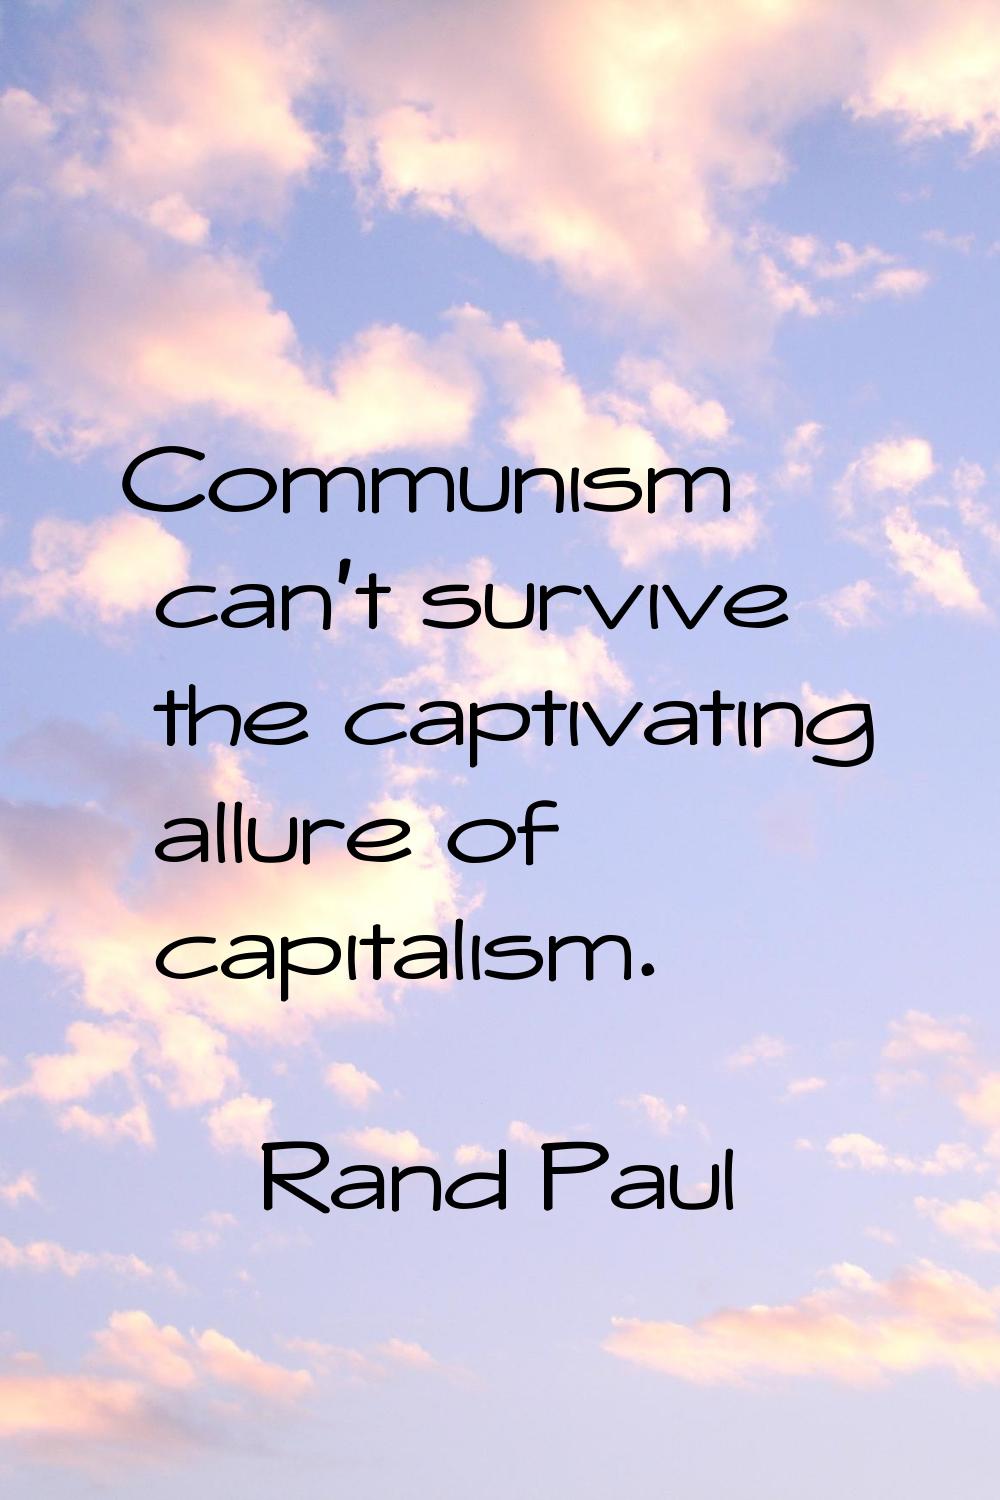 Communism can't survive the captivating allure of capitalism.